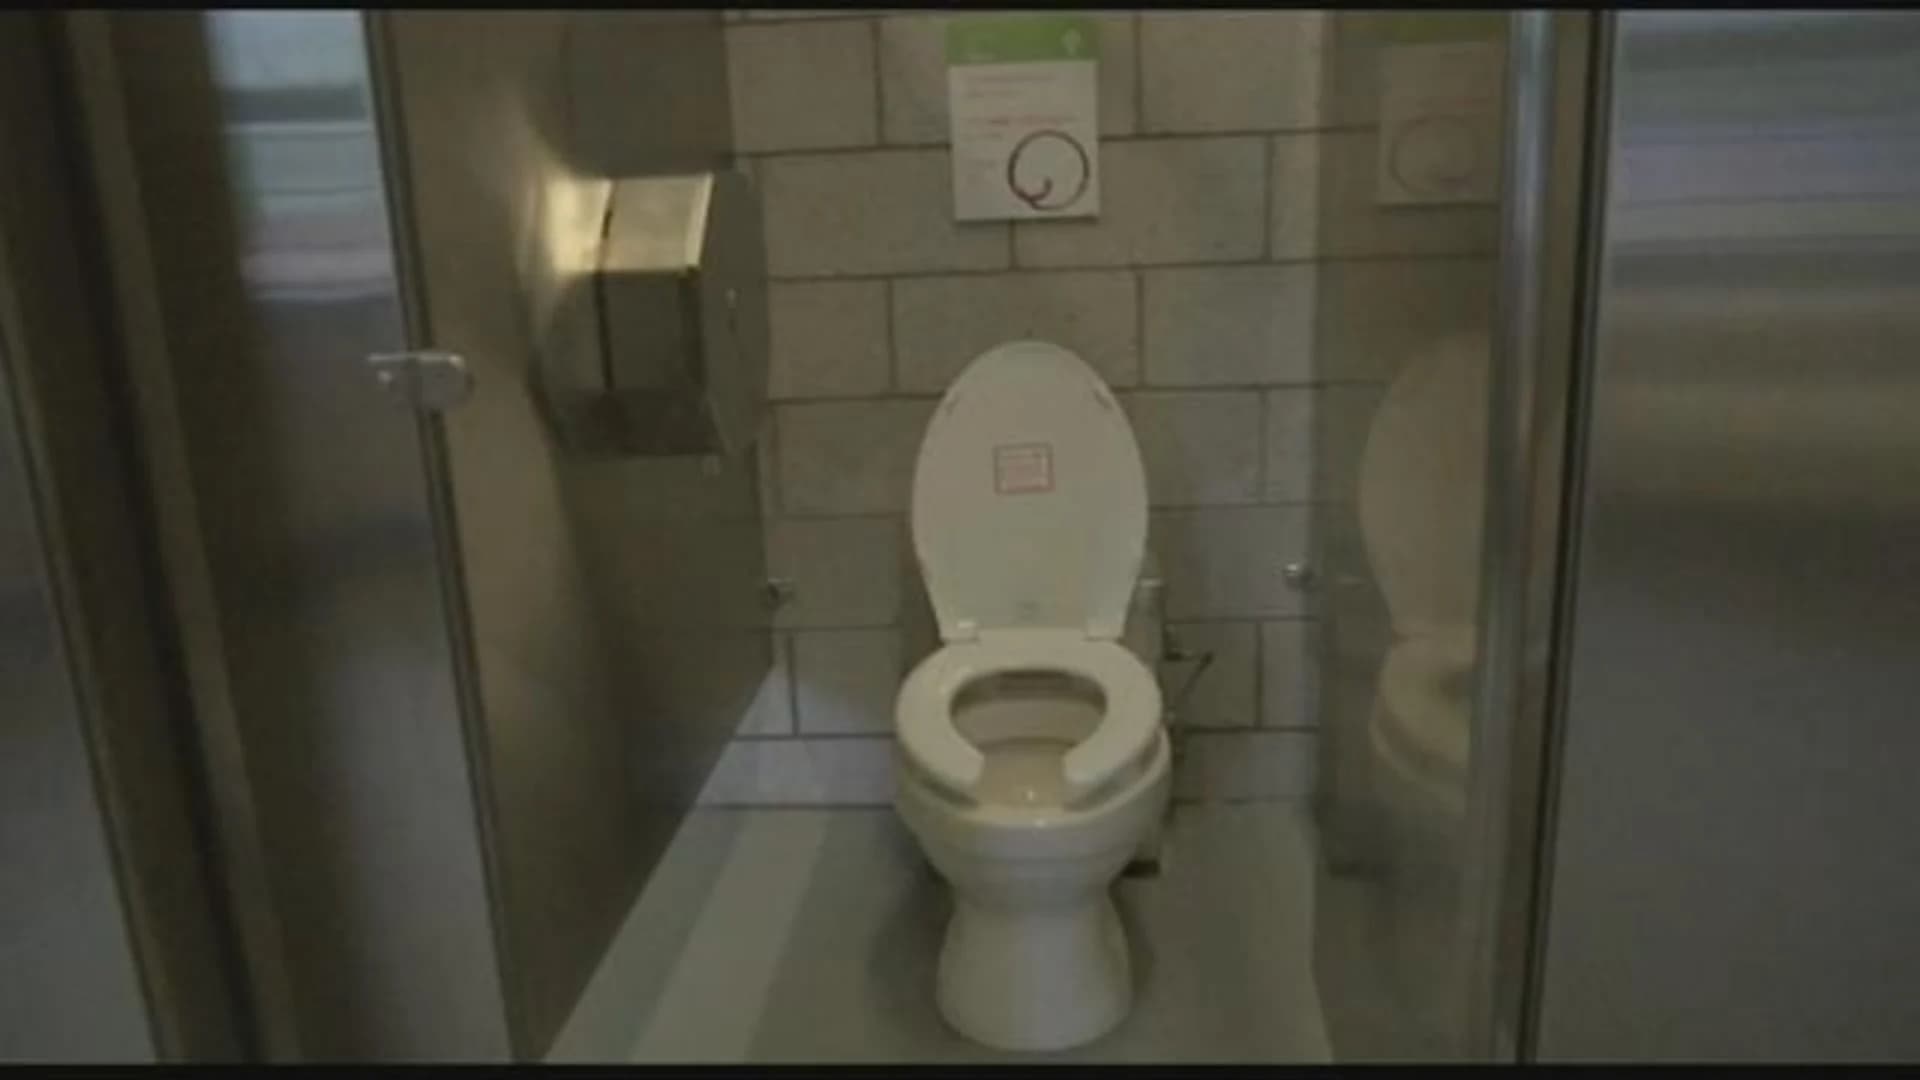 Prospect Park building turned into eco-friendly restrooms